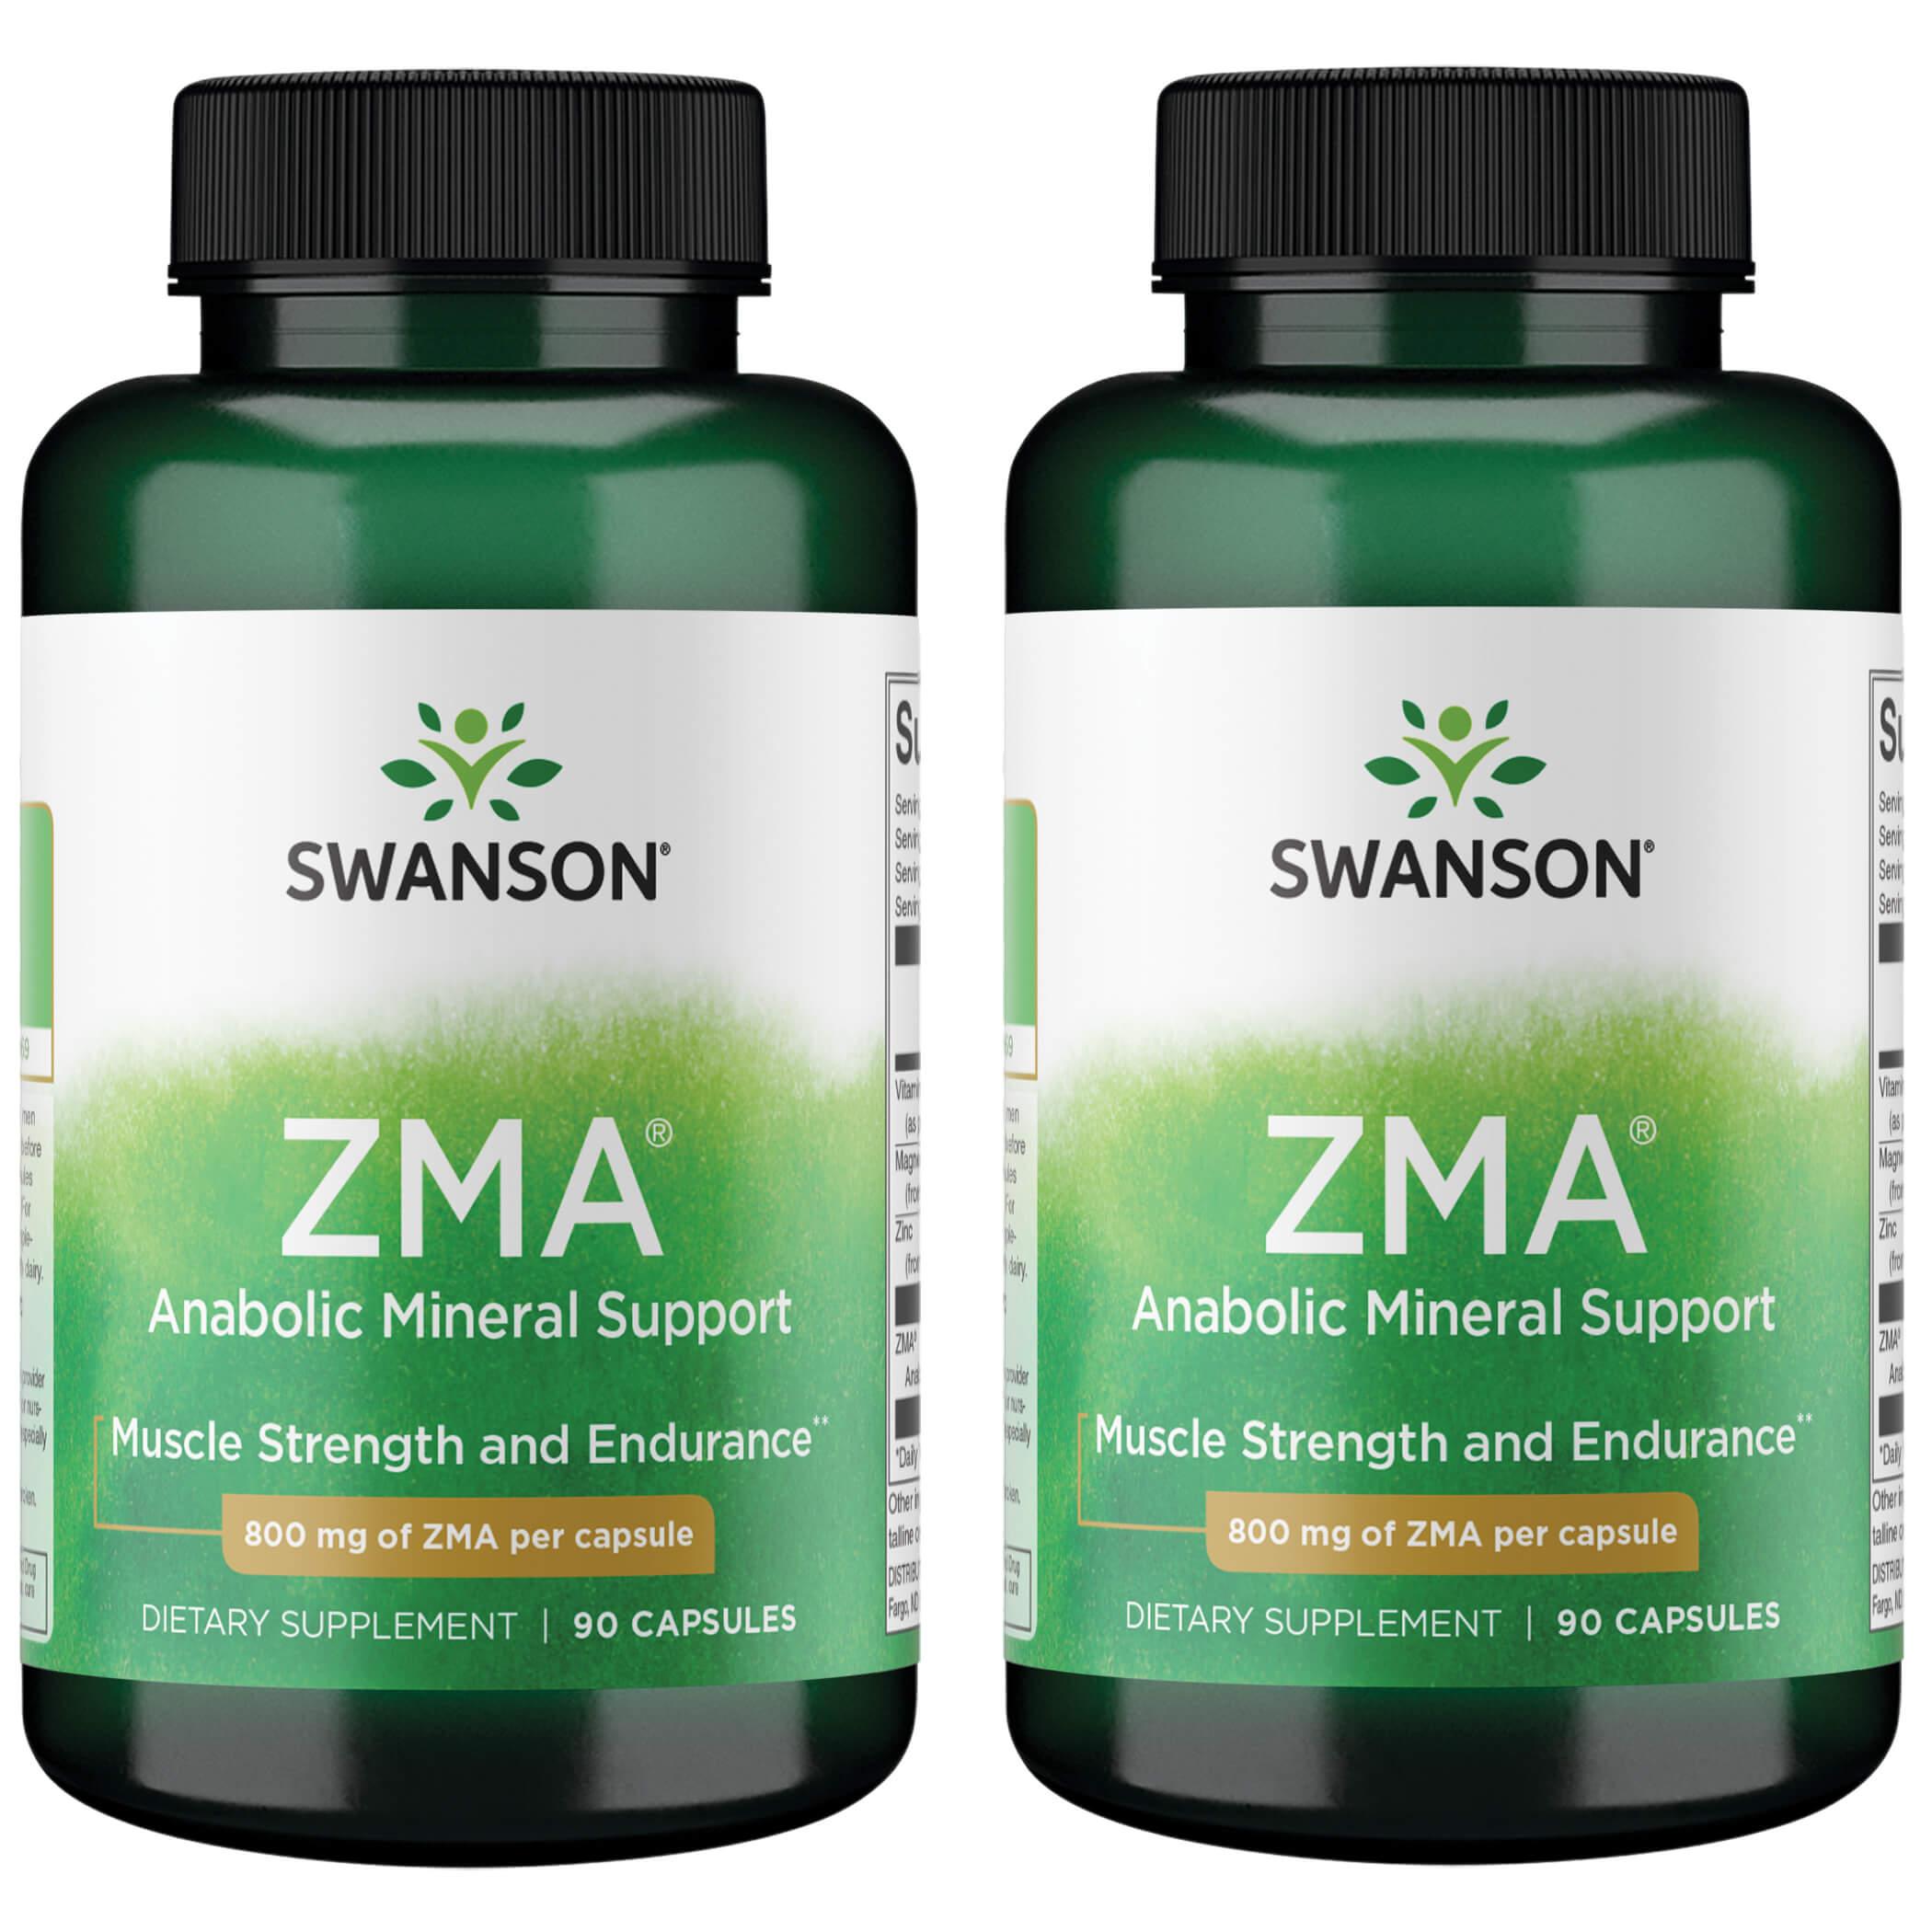 Swanson Ultra Zma Anabolic Mineral Support 2 Pack Vitamin 800 mg 90 Caps